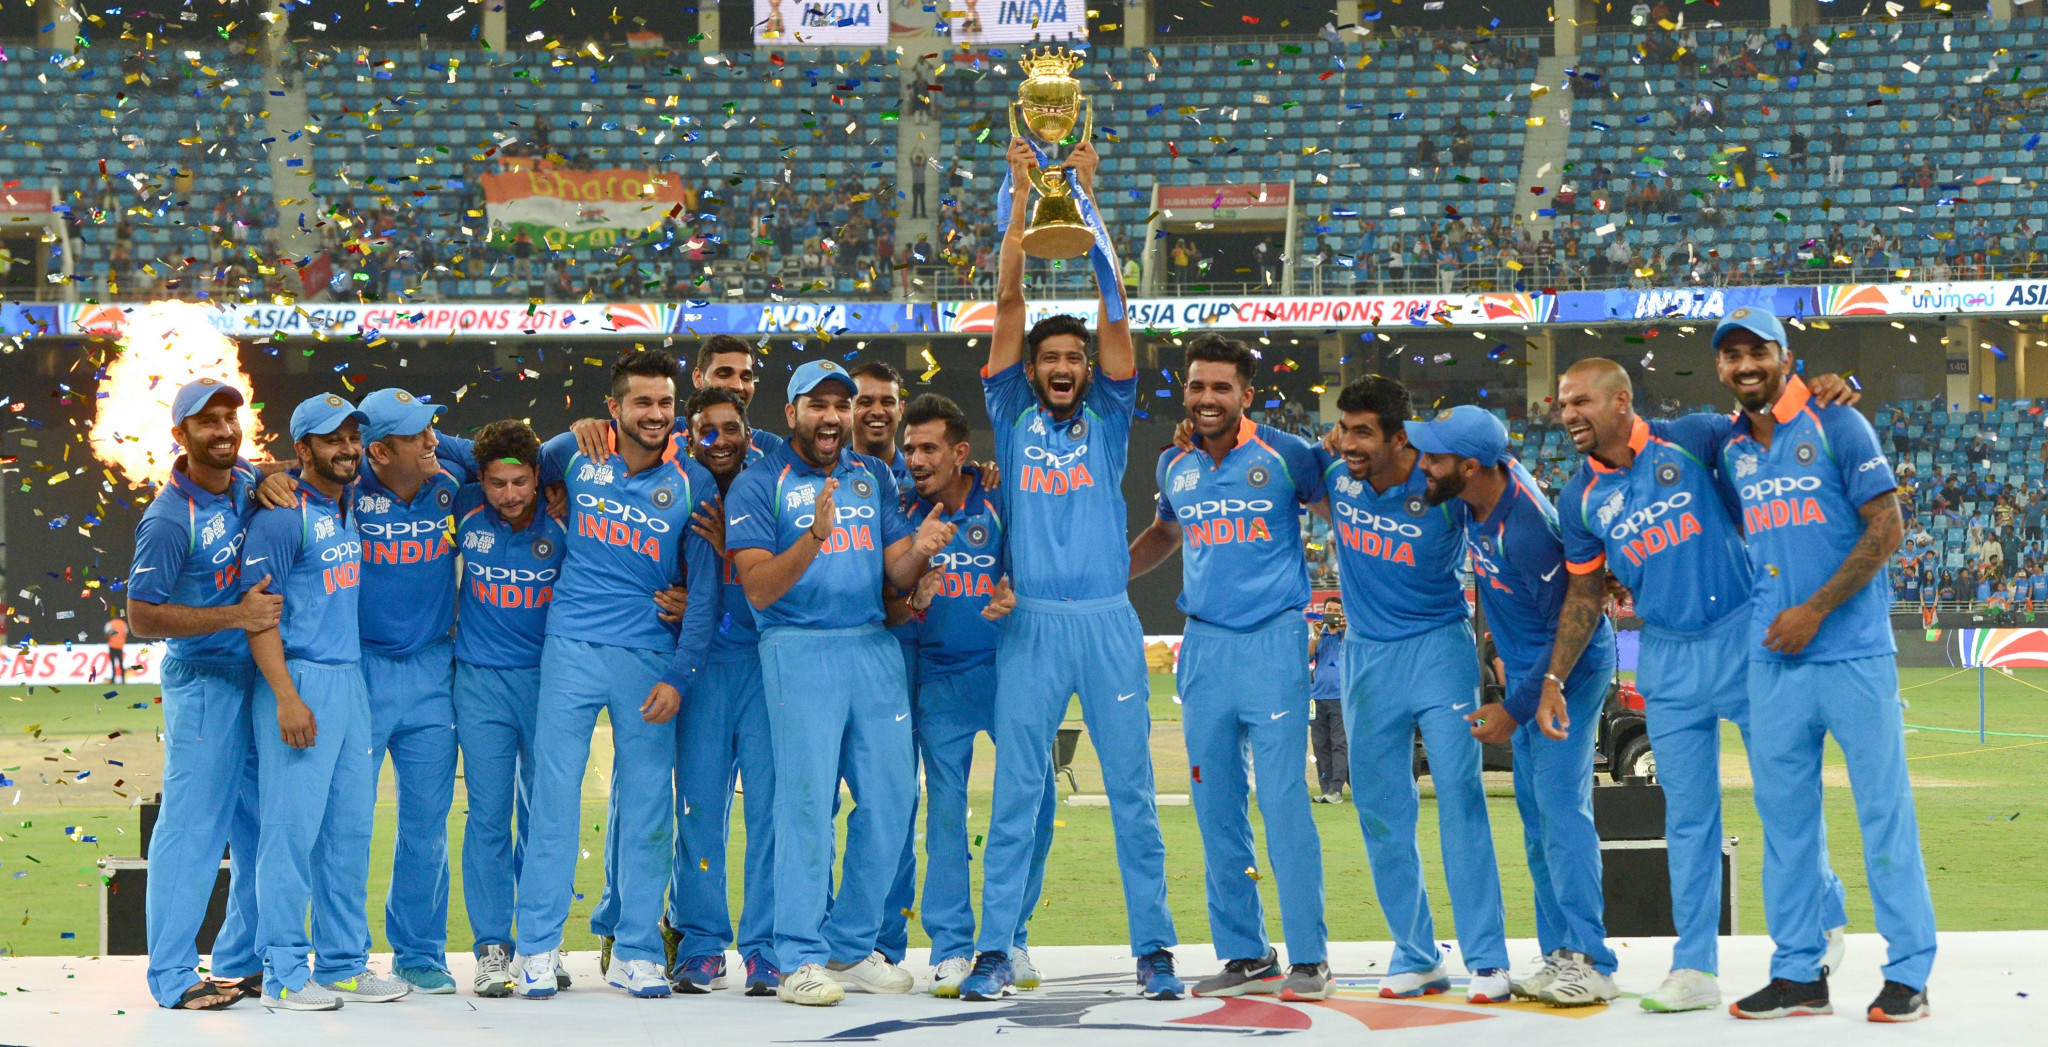 India have won the last two Asia Cup titles ©Getty Images